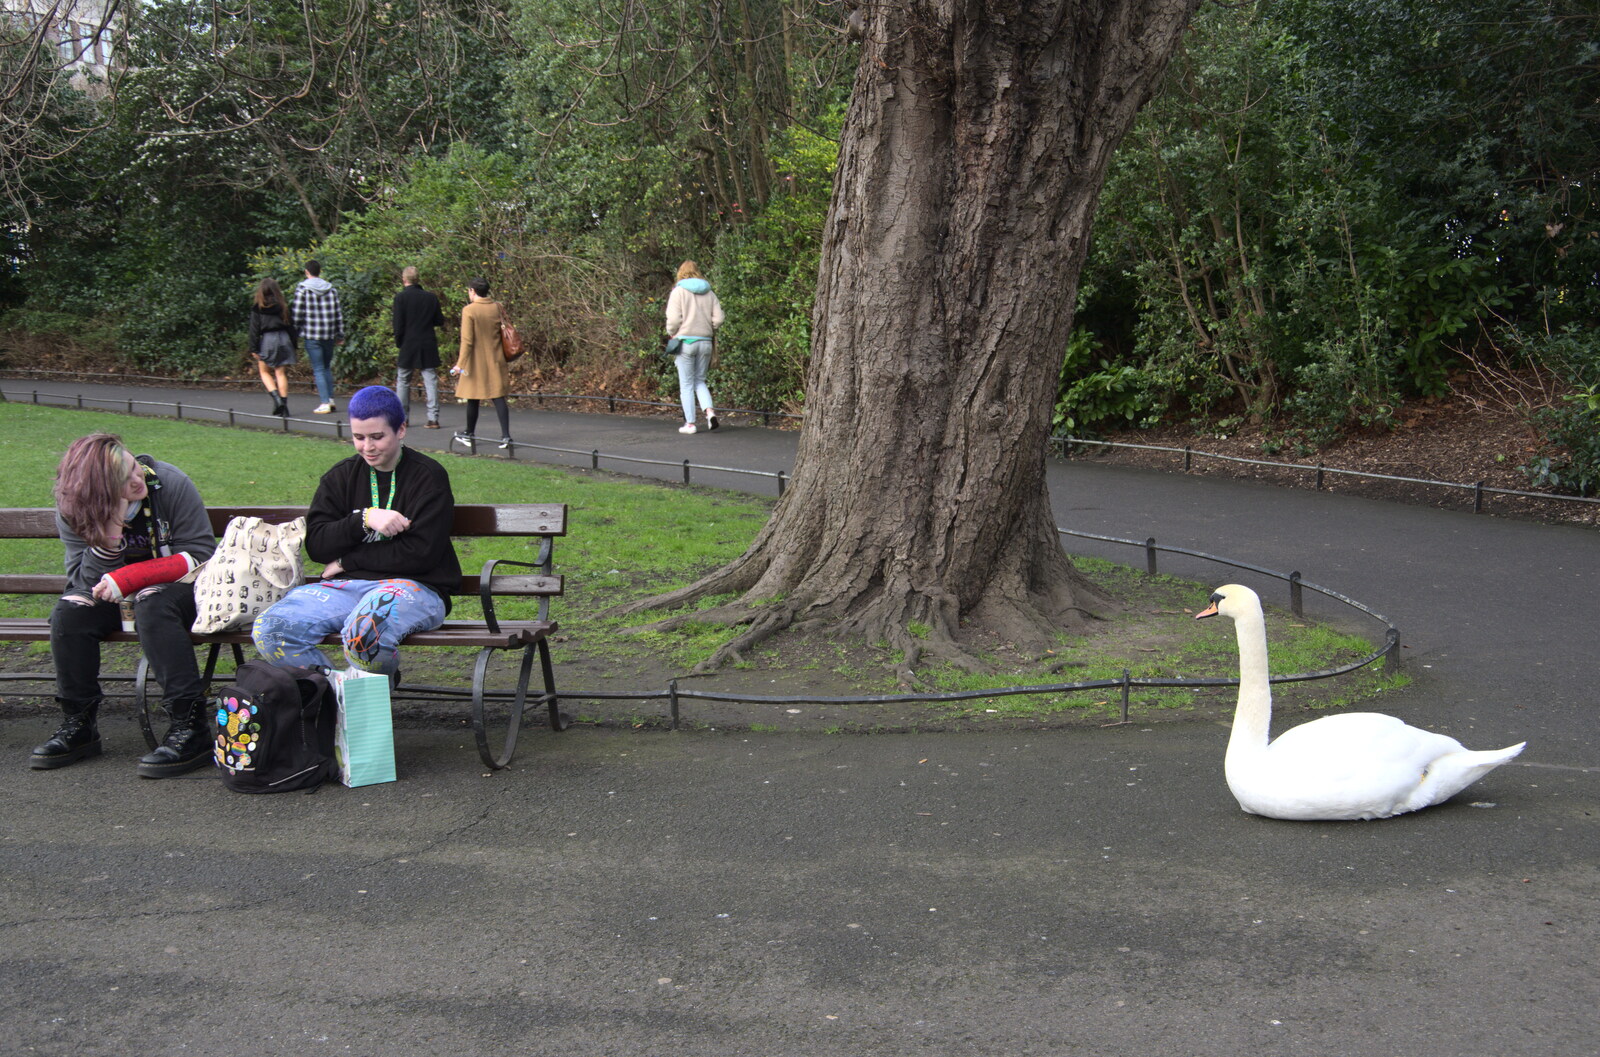 A swan sits on the path in St. Stephen's Green from The Dead Zoo, Dublin, Ireland - 17th February 2023